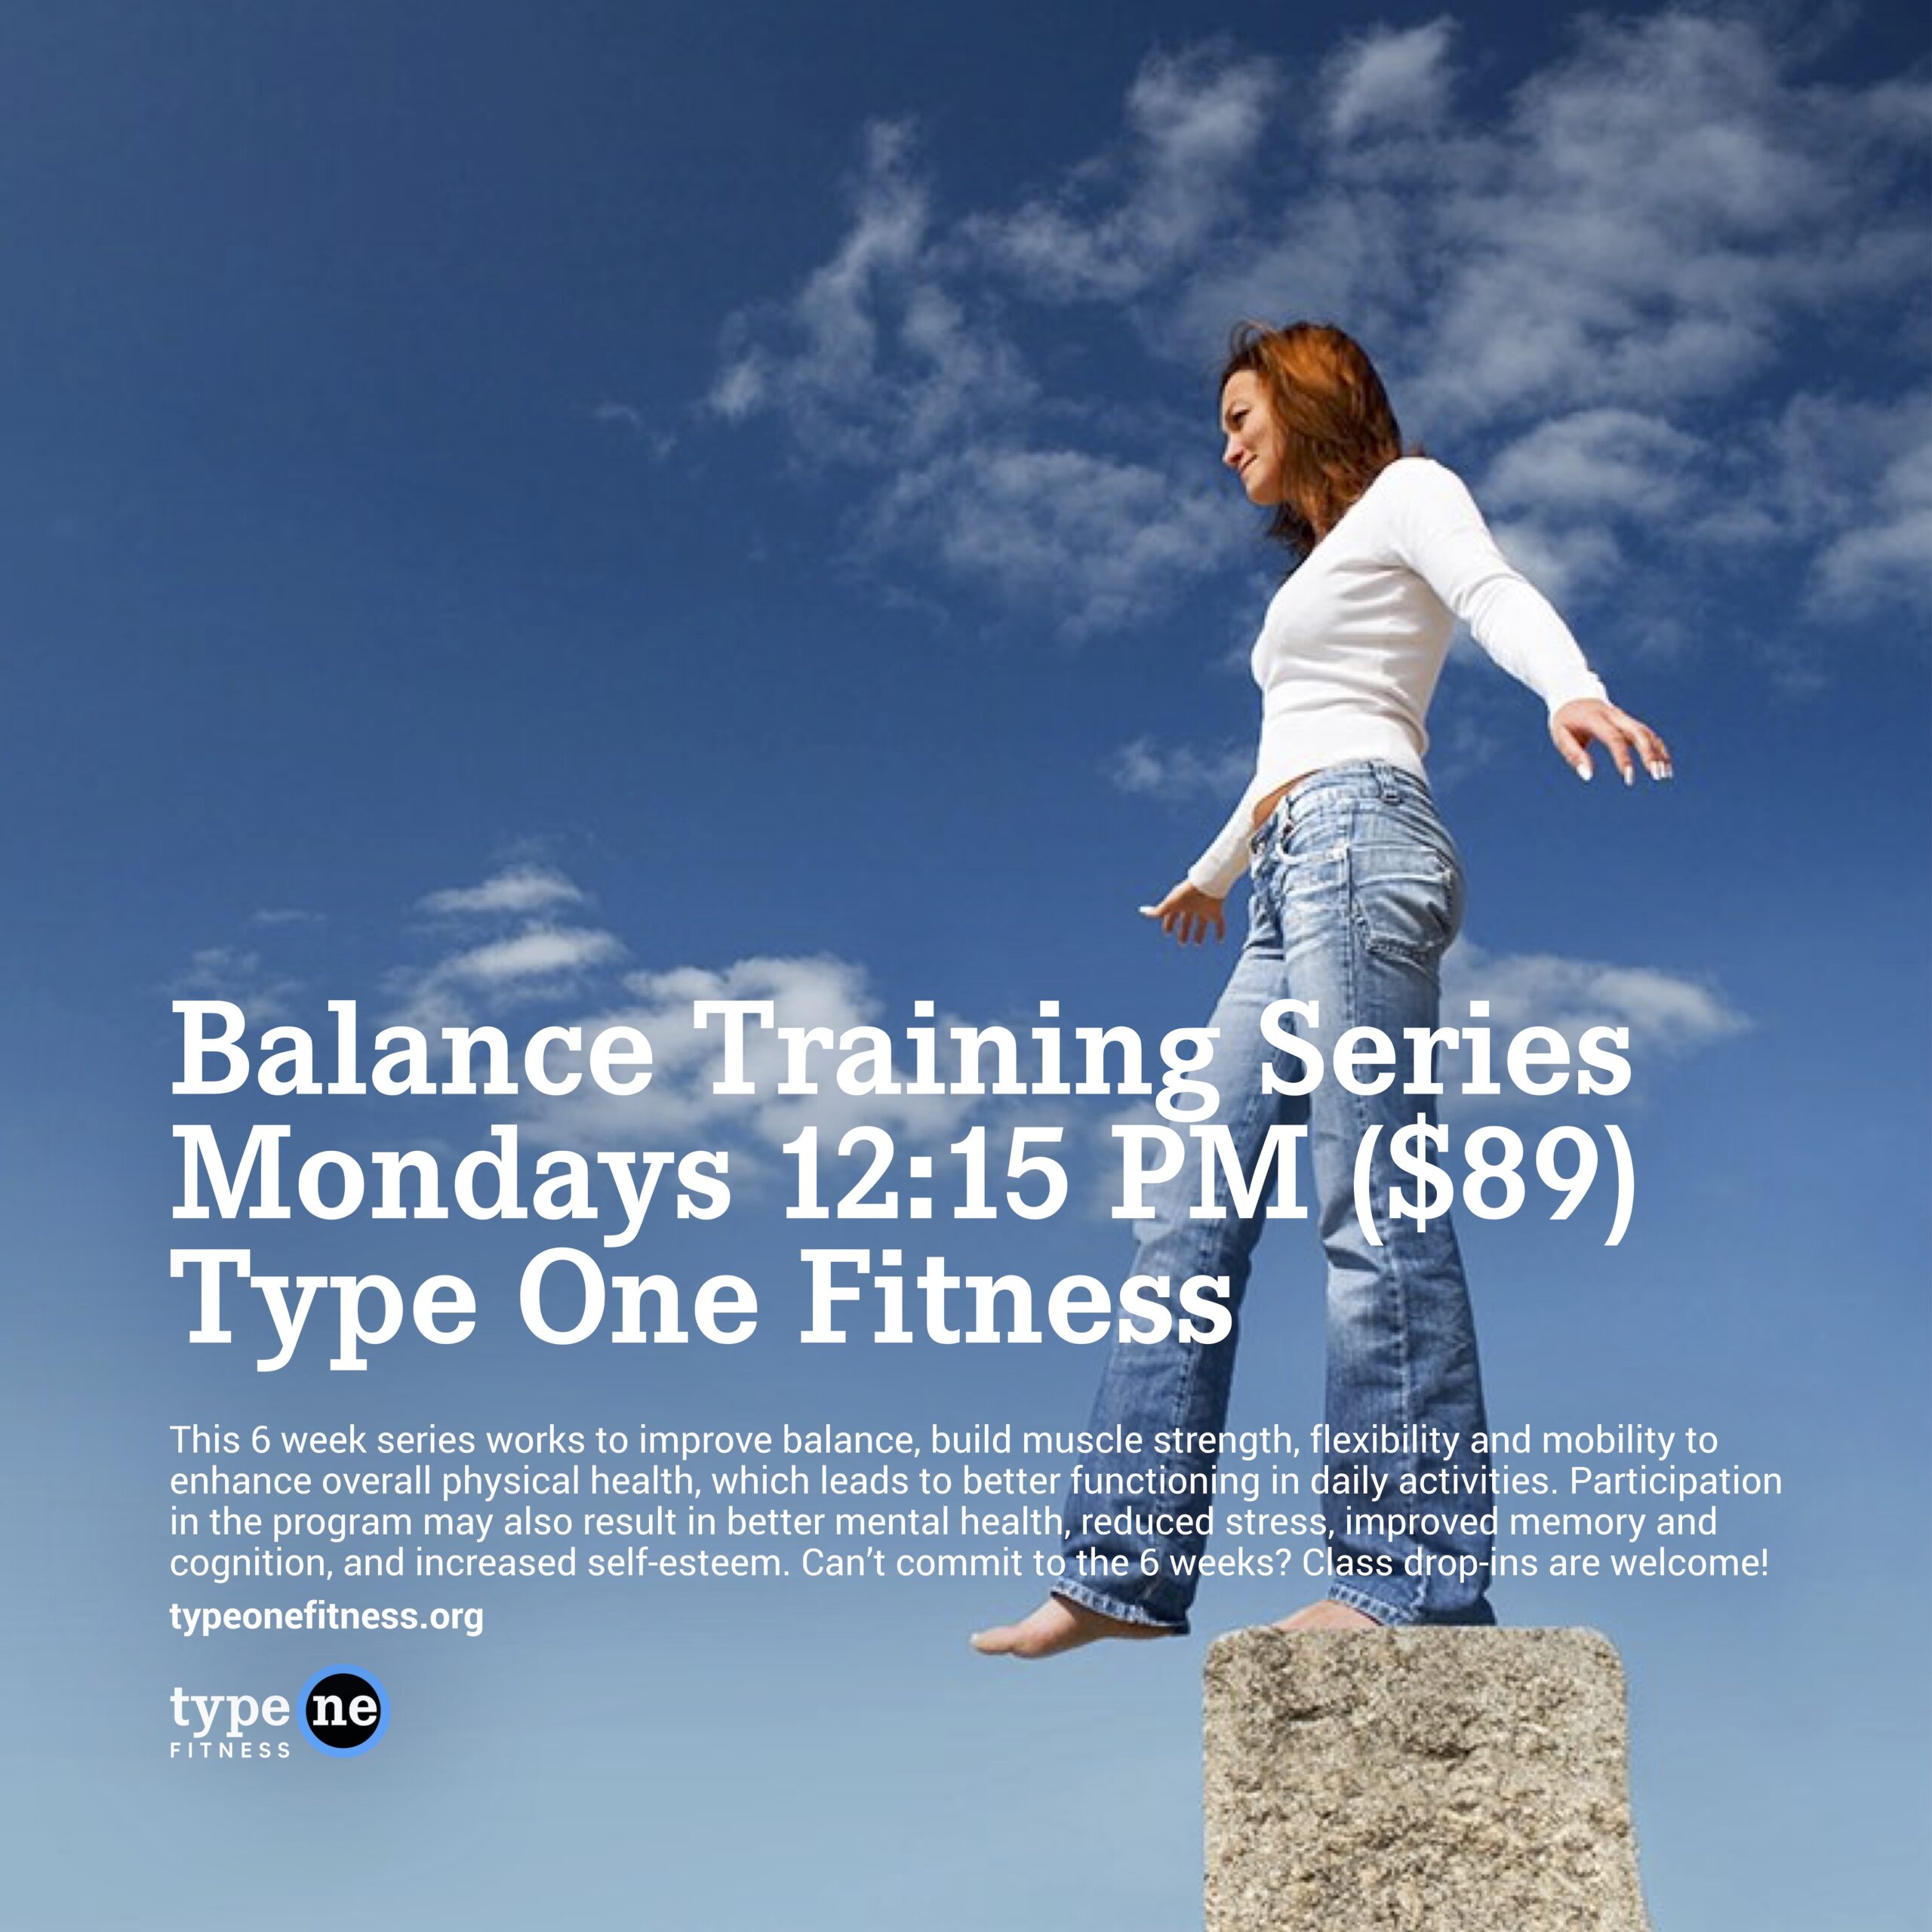 Balance and Fitness Class 1 